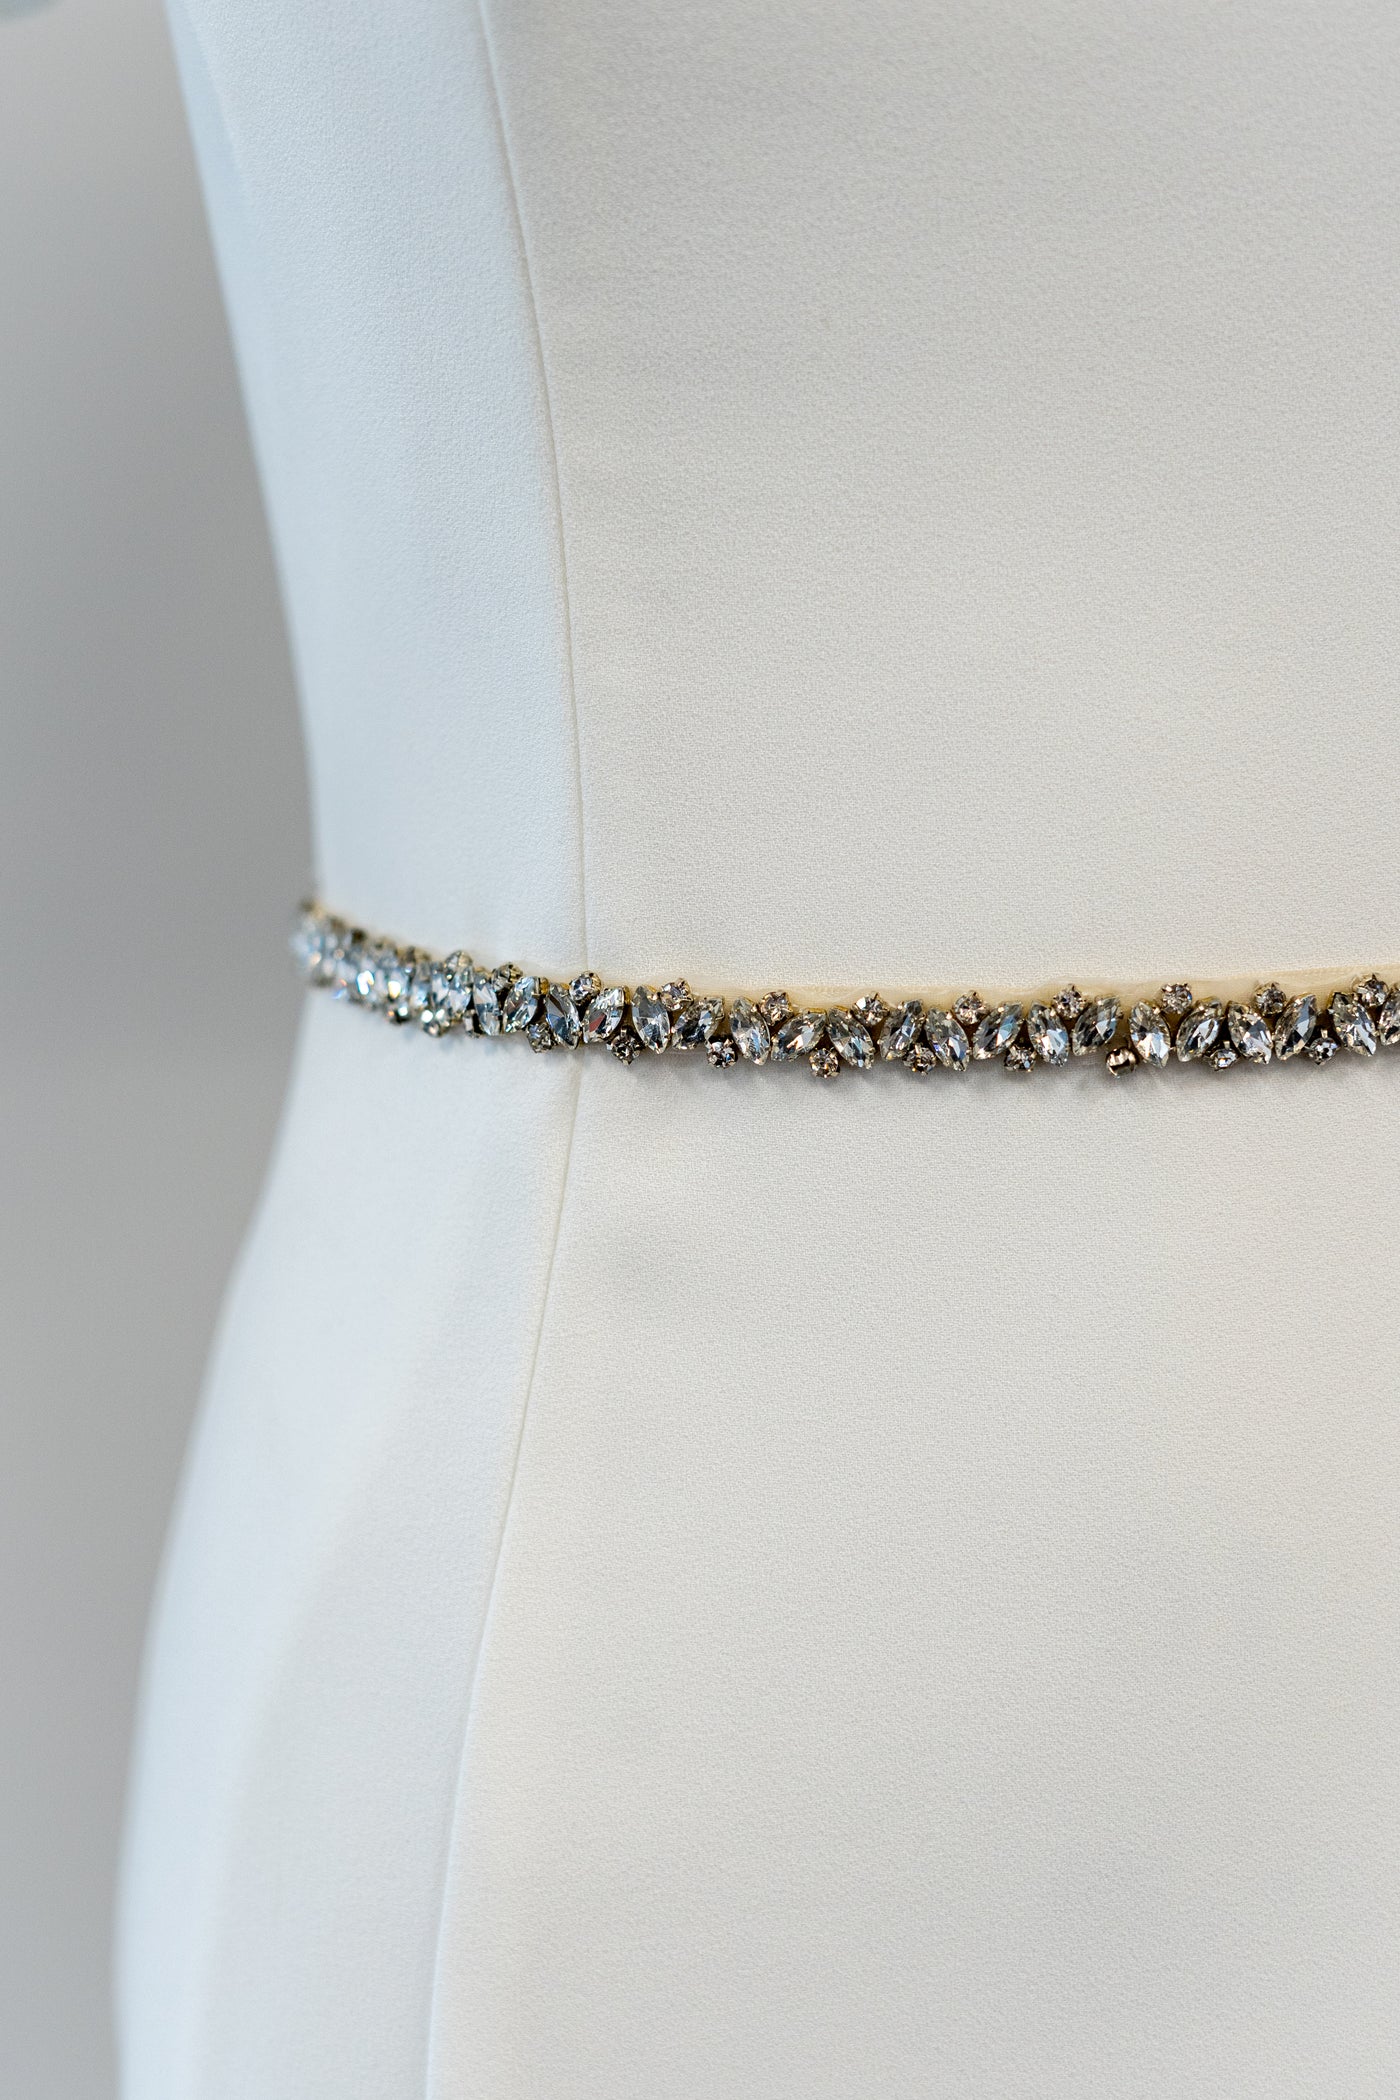 A beautifully studded belt with different sizes of diamonds in alternating directions to accessorize a modest wedding dress.